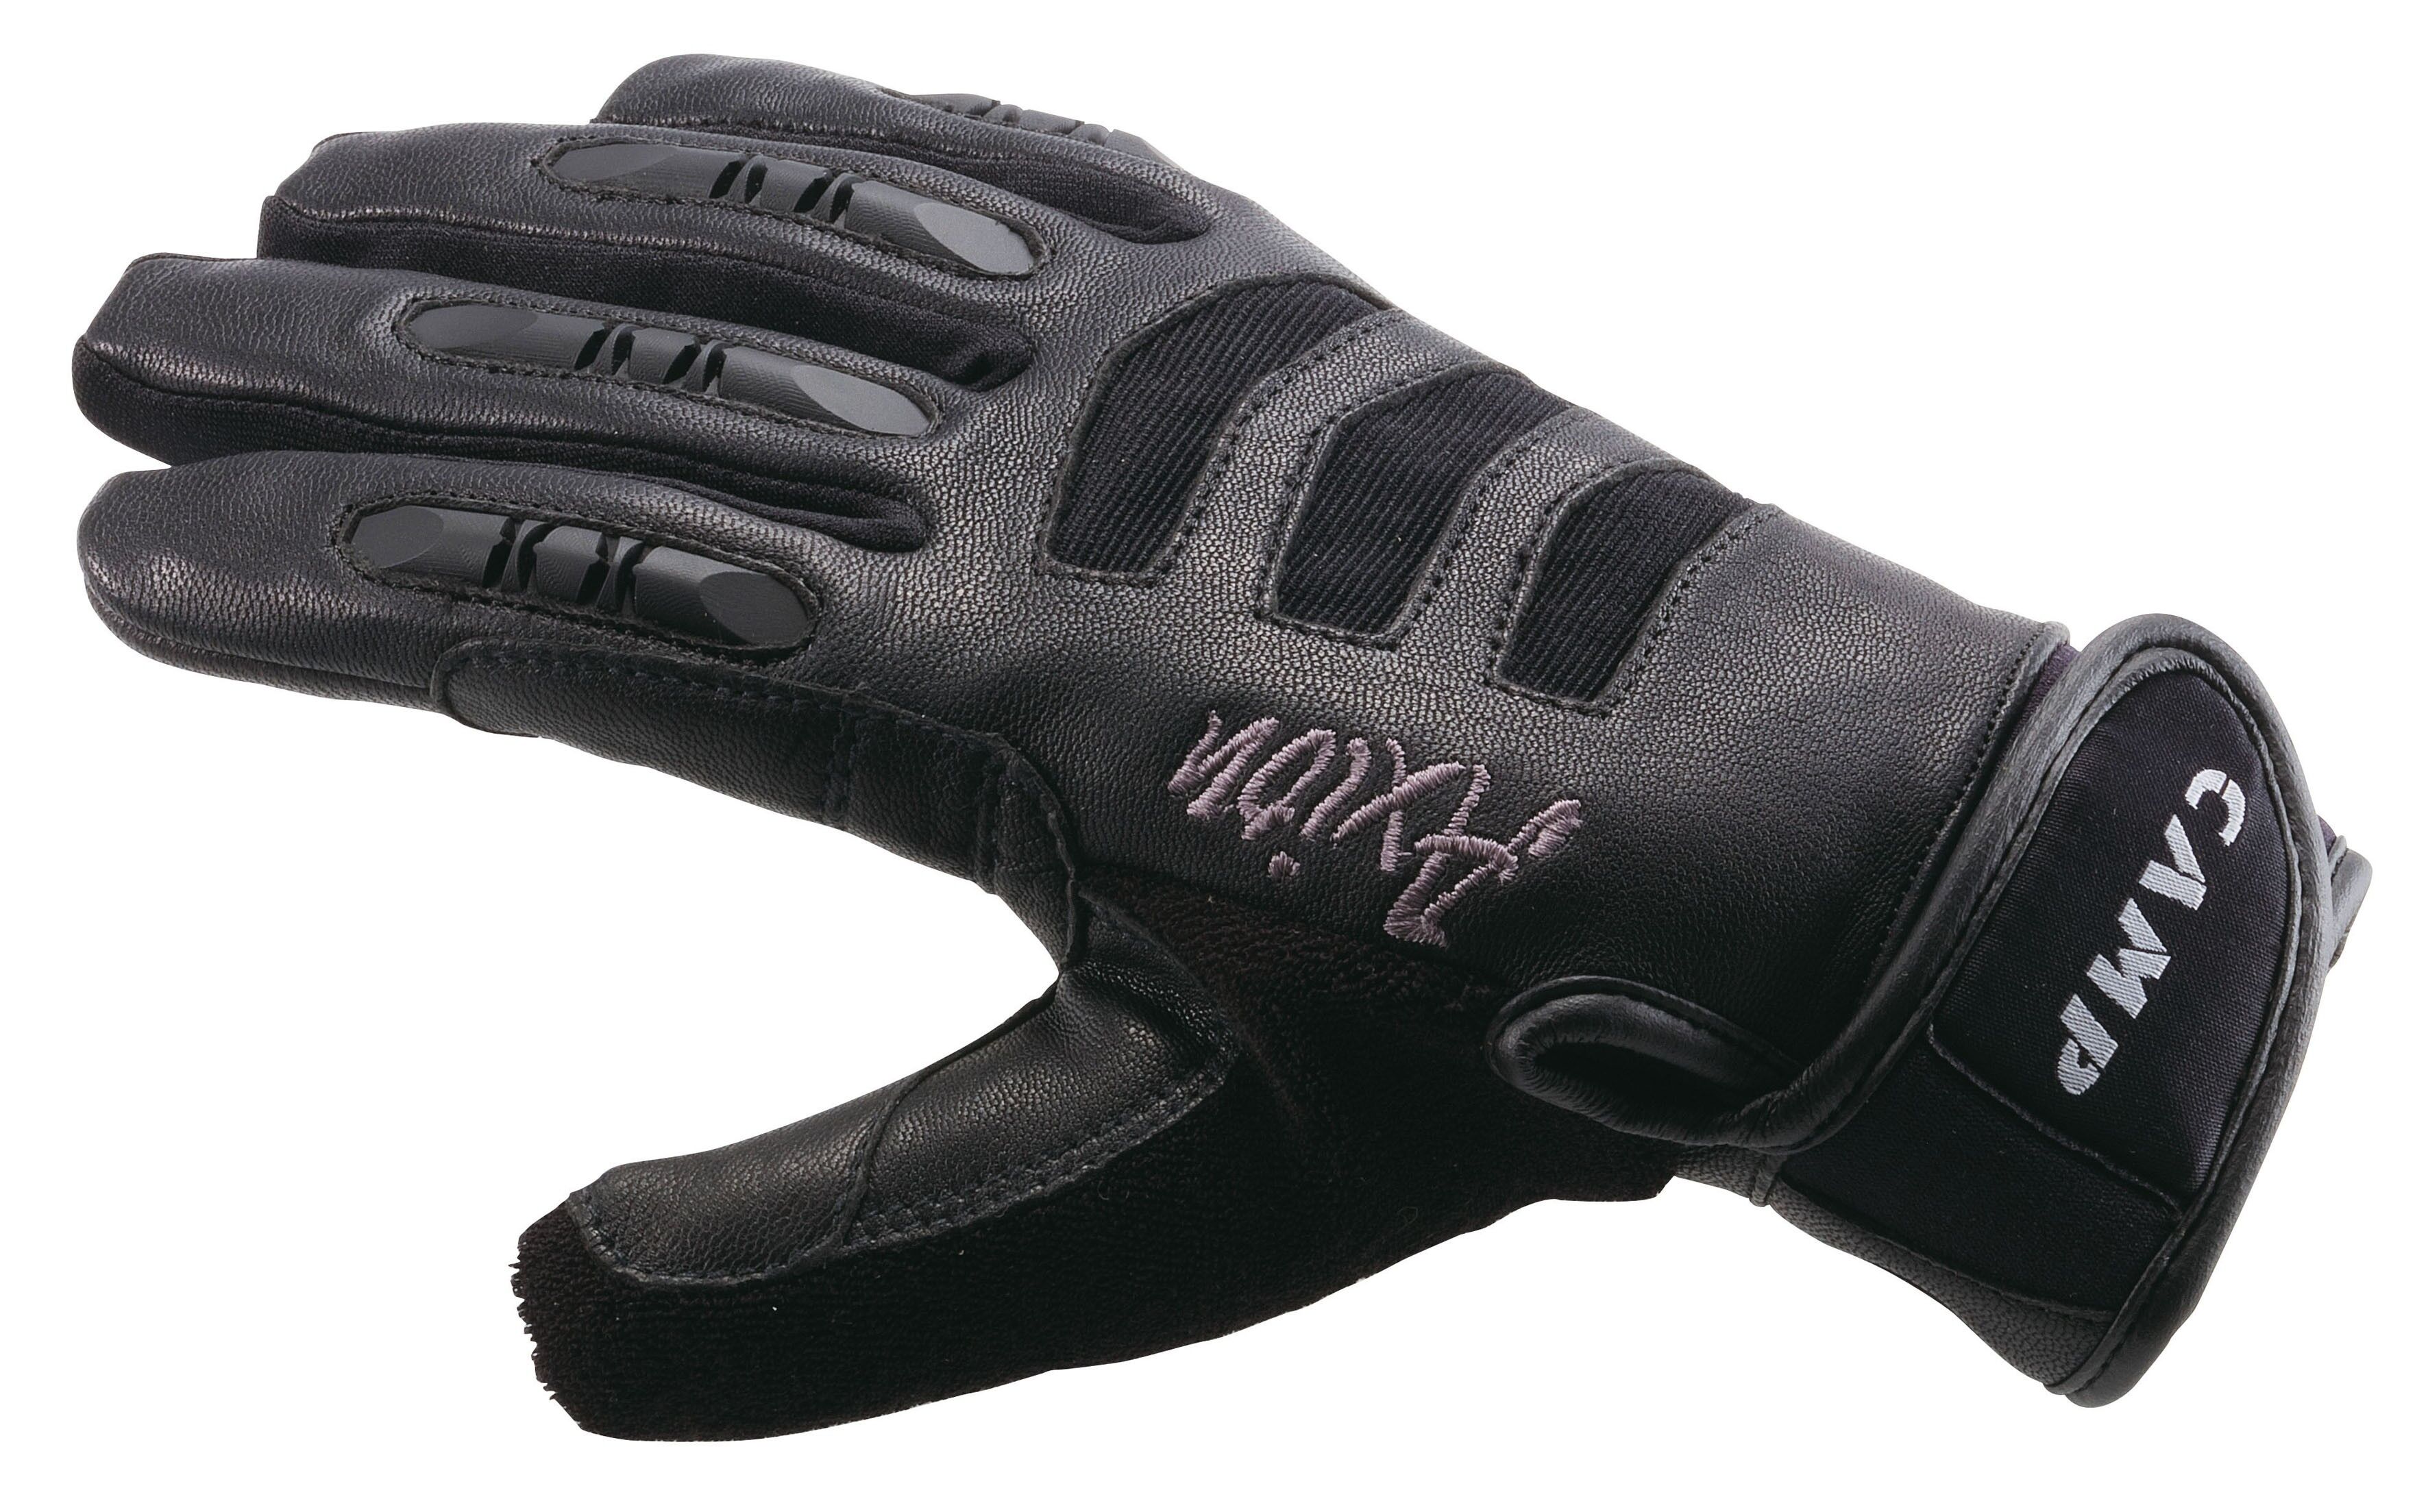 Camp Axion Black Full Fingers - Climbing gloves